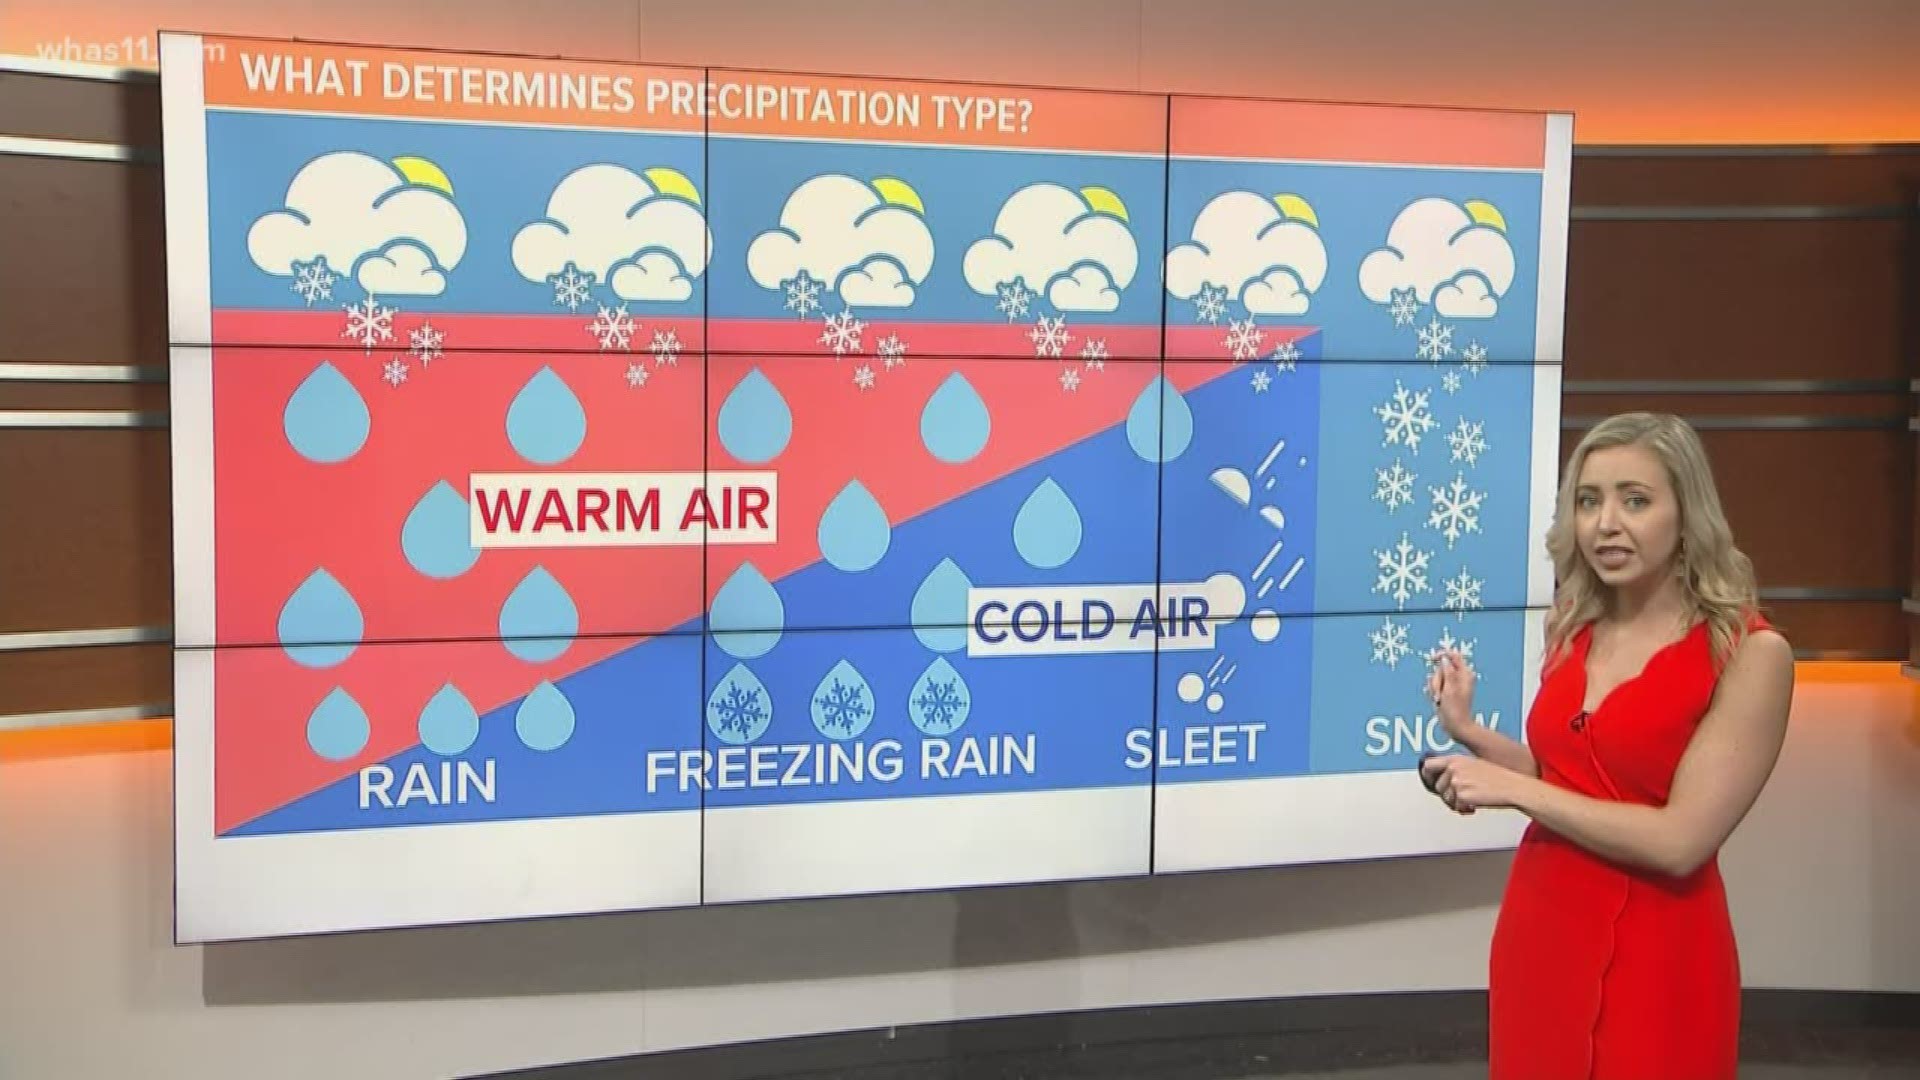 We see everything from rain to sleet to snow. What determines the kind of precipitation we get?